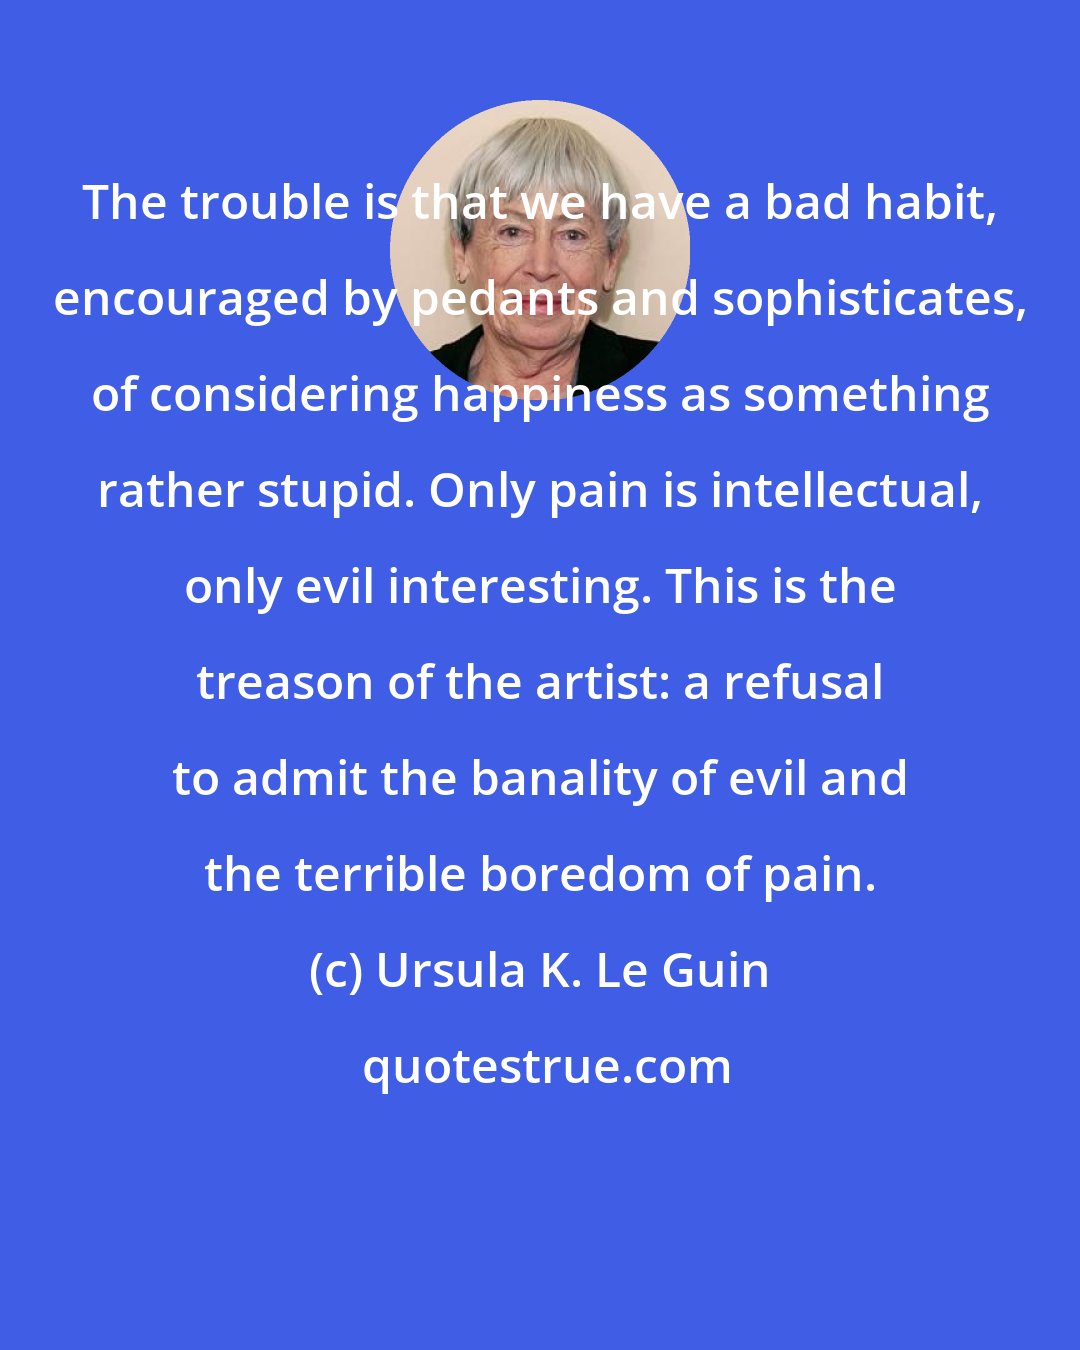 Ursula K. Le Guin: The trouble is that we have a bad habit, encouraged by pedants and sophisticates, of considering happiness as something rather stupid. Only pain is intellectual, only evil interesting. This is the treason of the artist: a refusal to admit the banality of evil and the terrible boredom of pain.